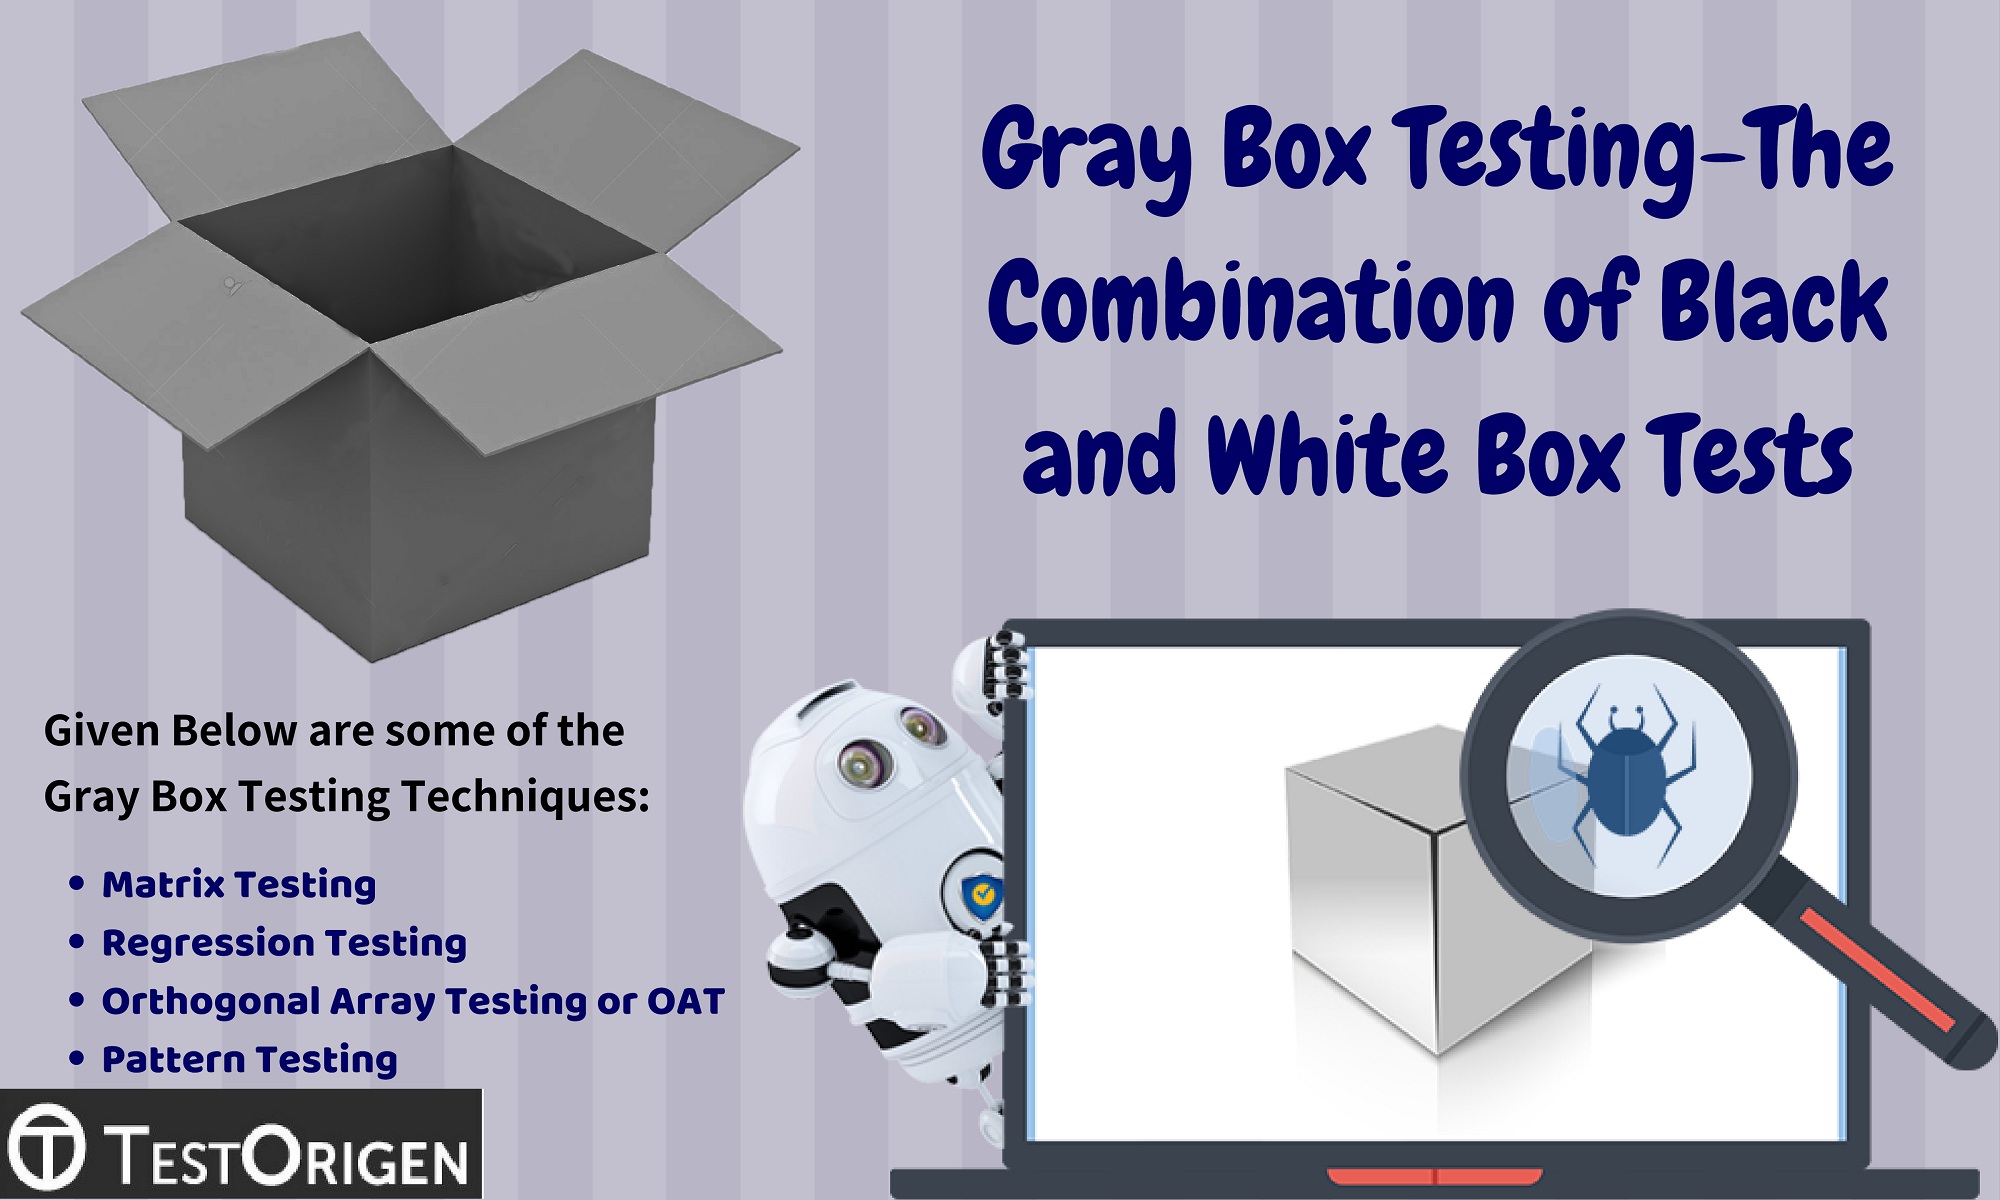 Gray Box Testing-The Combination of Black and White Box Tests